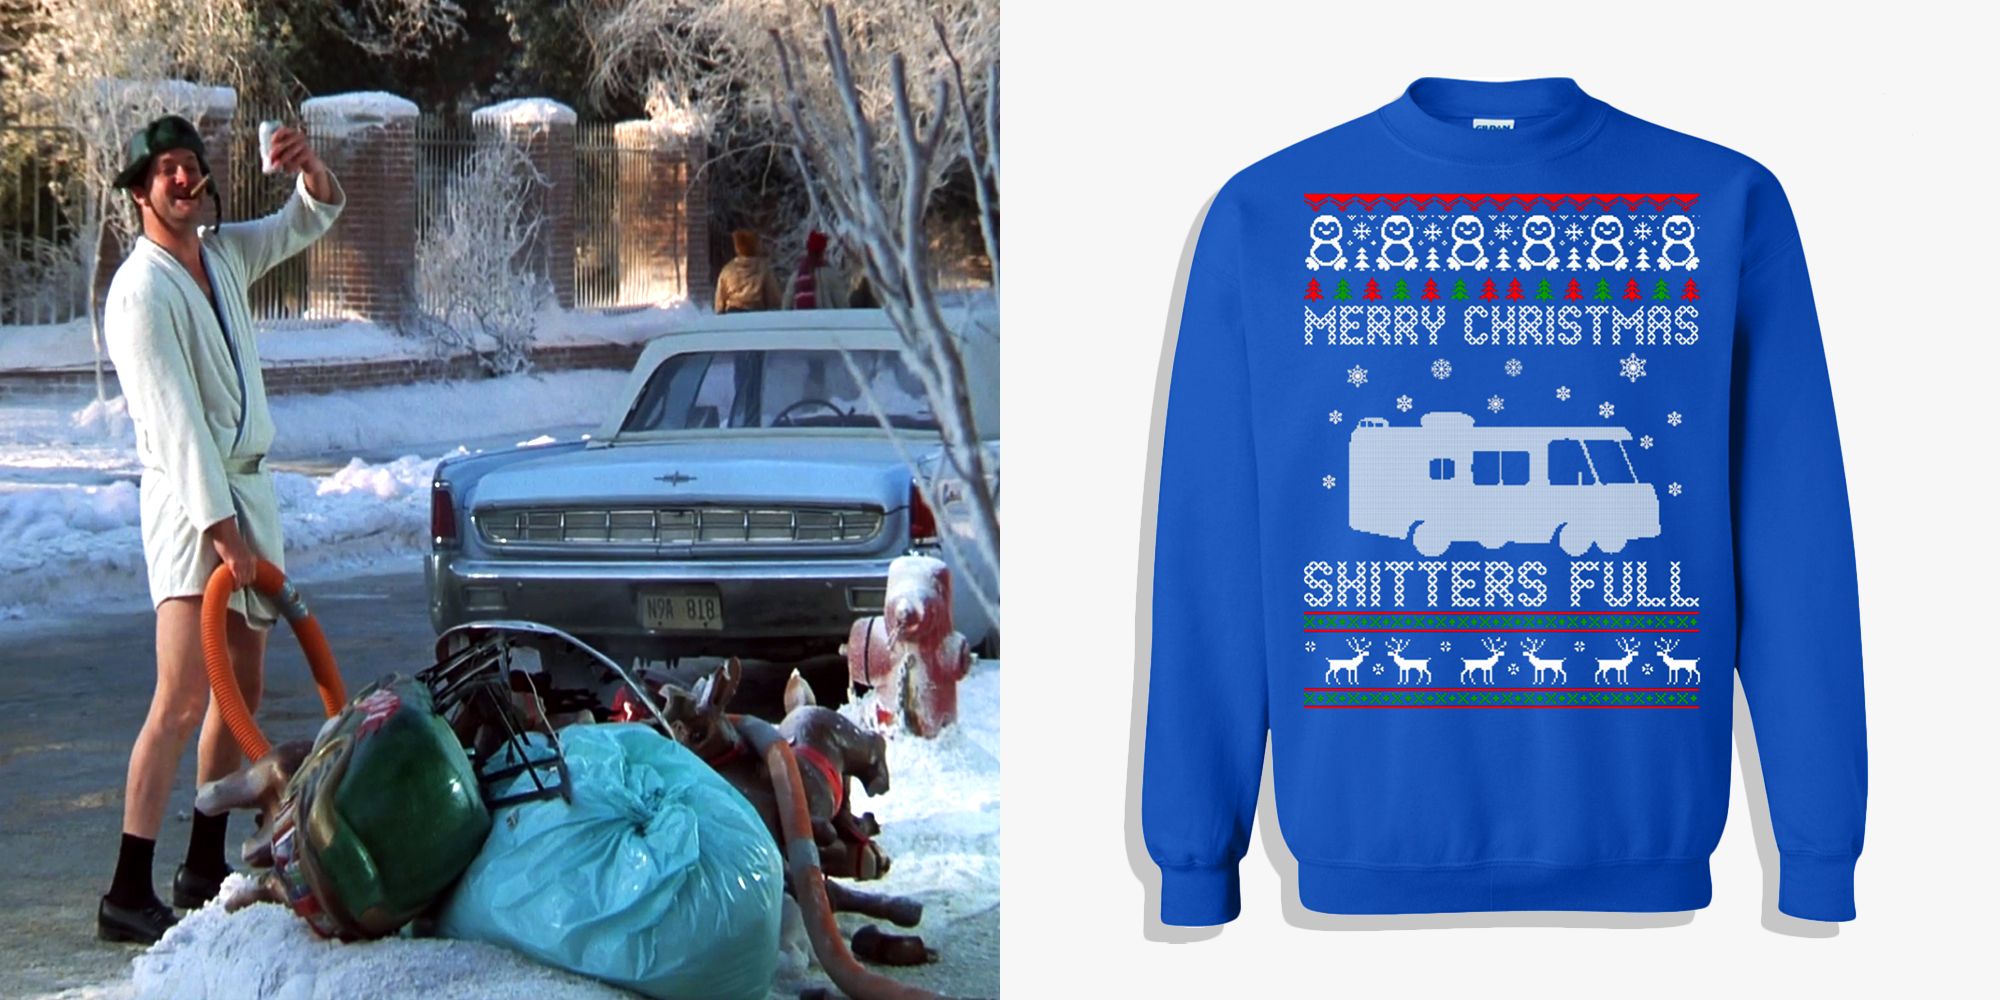 Clark Griswold's Sweater from National Lampoon's Christmas Vacation